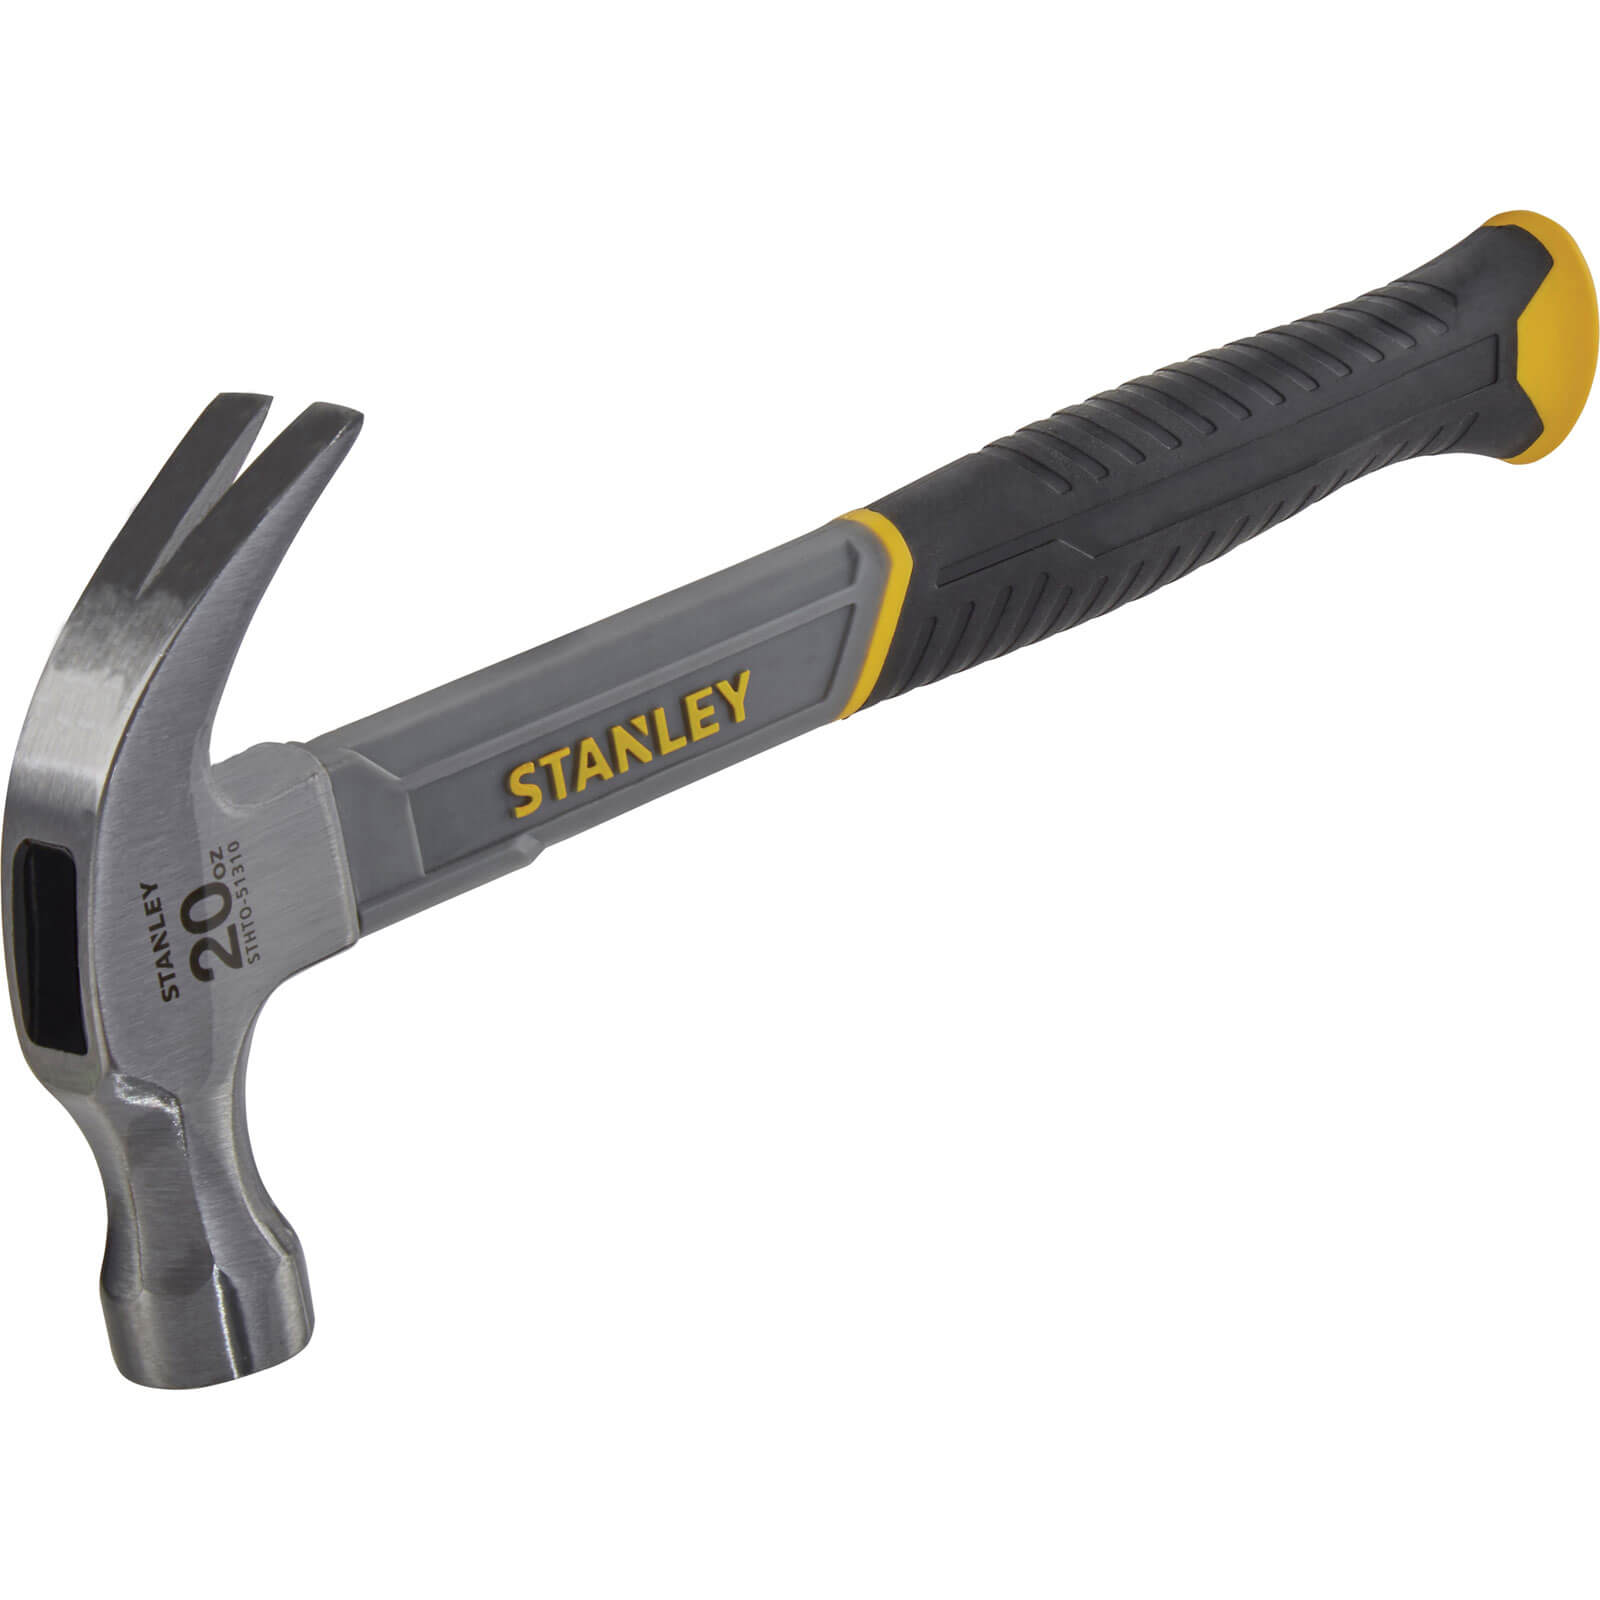 Image of Stanley Curved Claw Fibreglass Hammer 570g